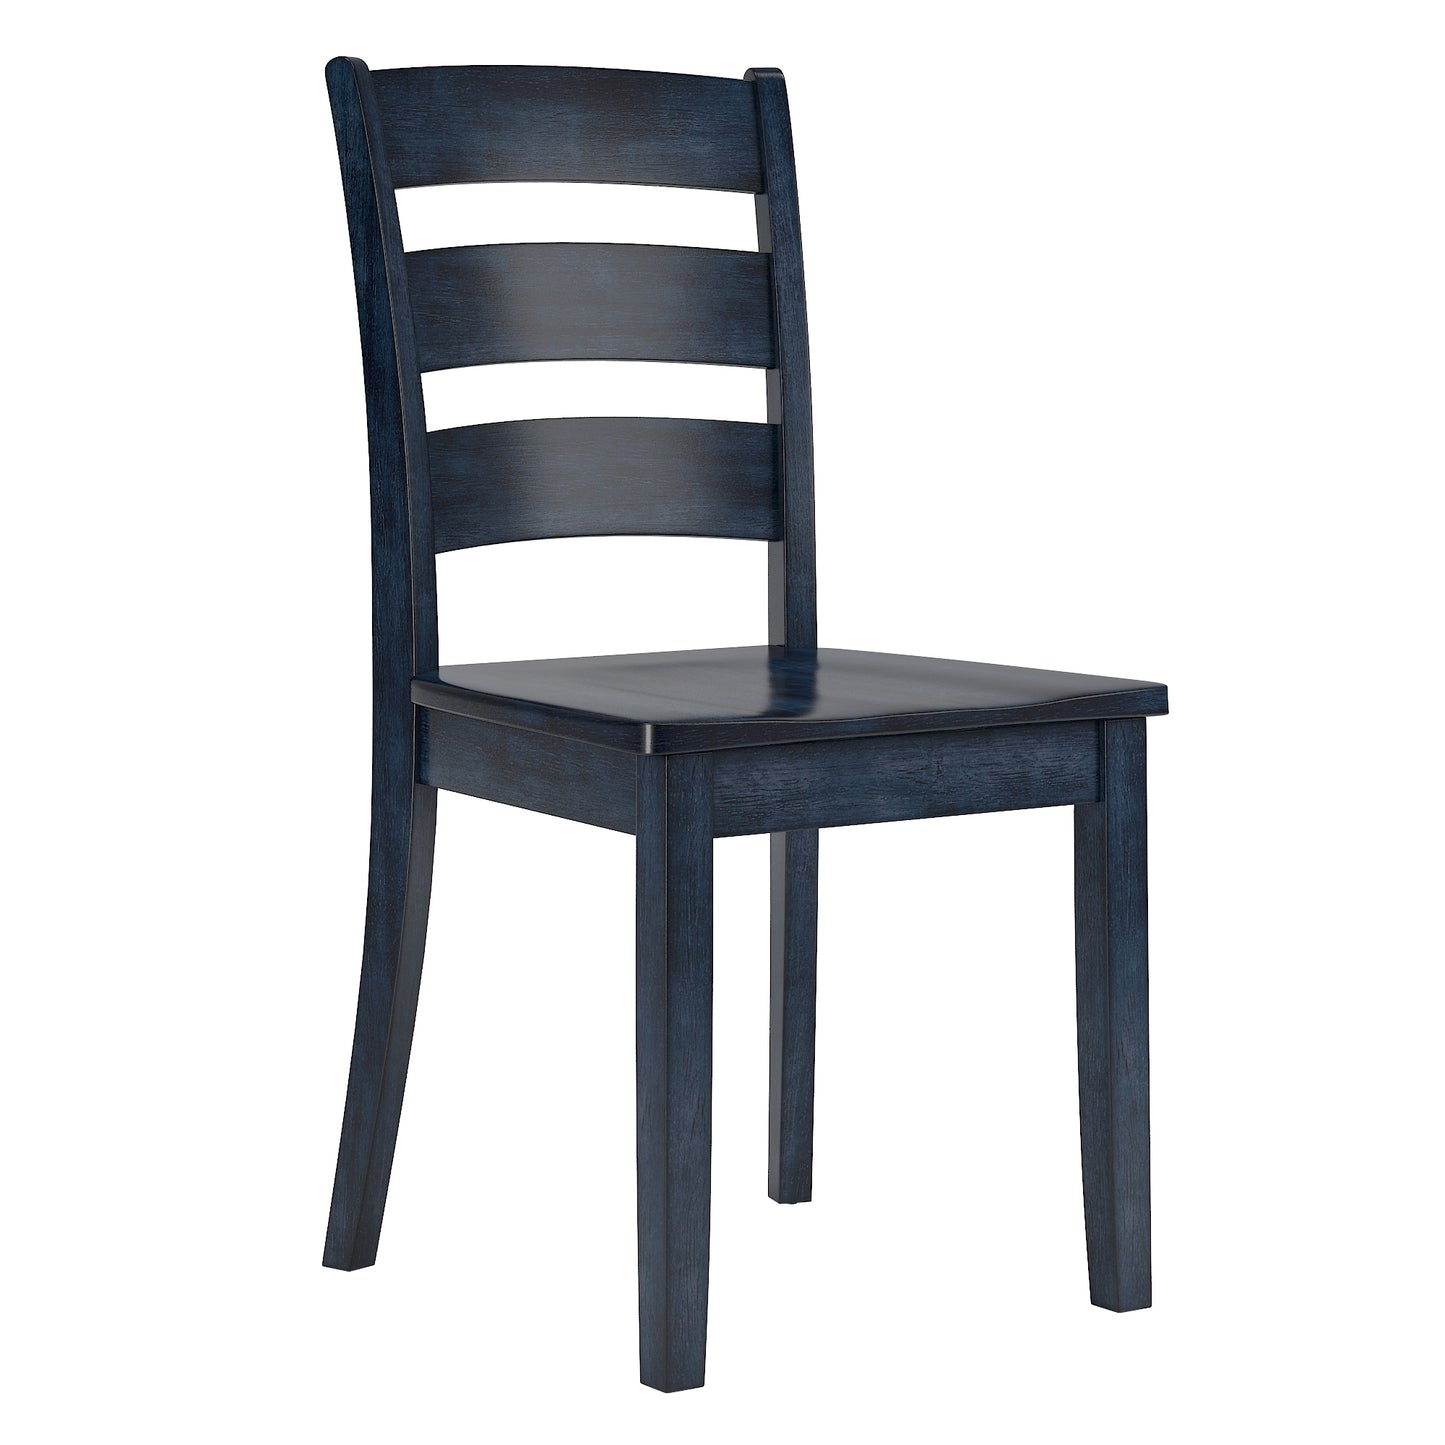 Two-Tone Round 5-Piece Dining Set - Antique Denim Finish, Ladder Back Chairs